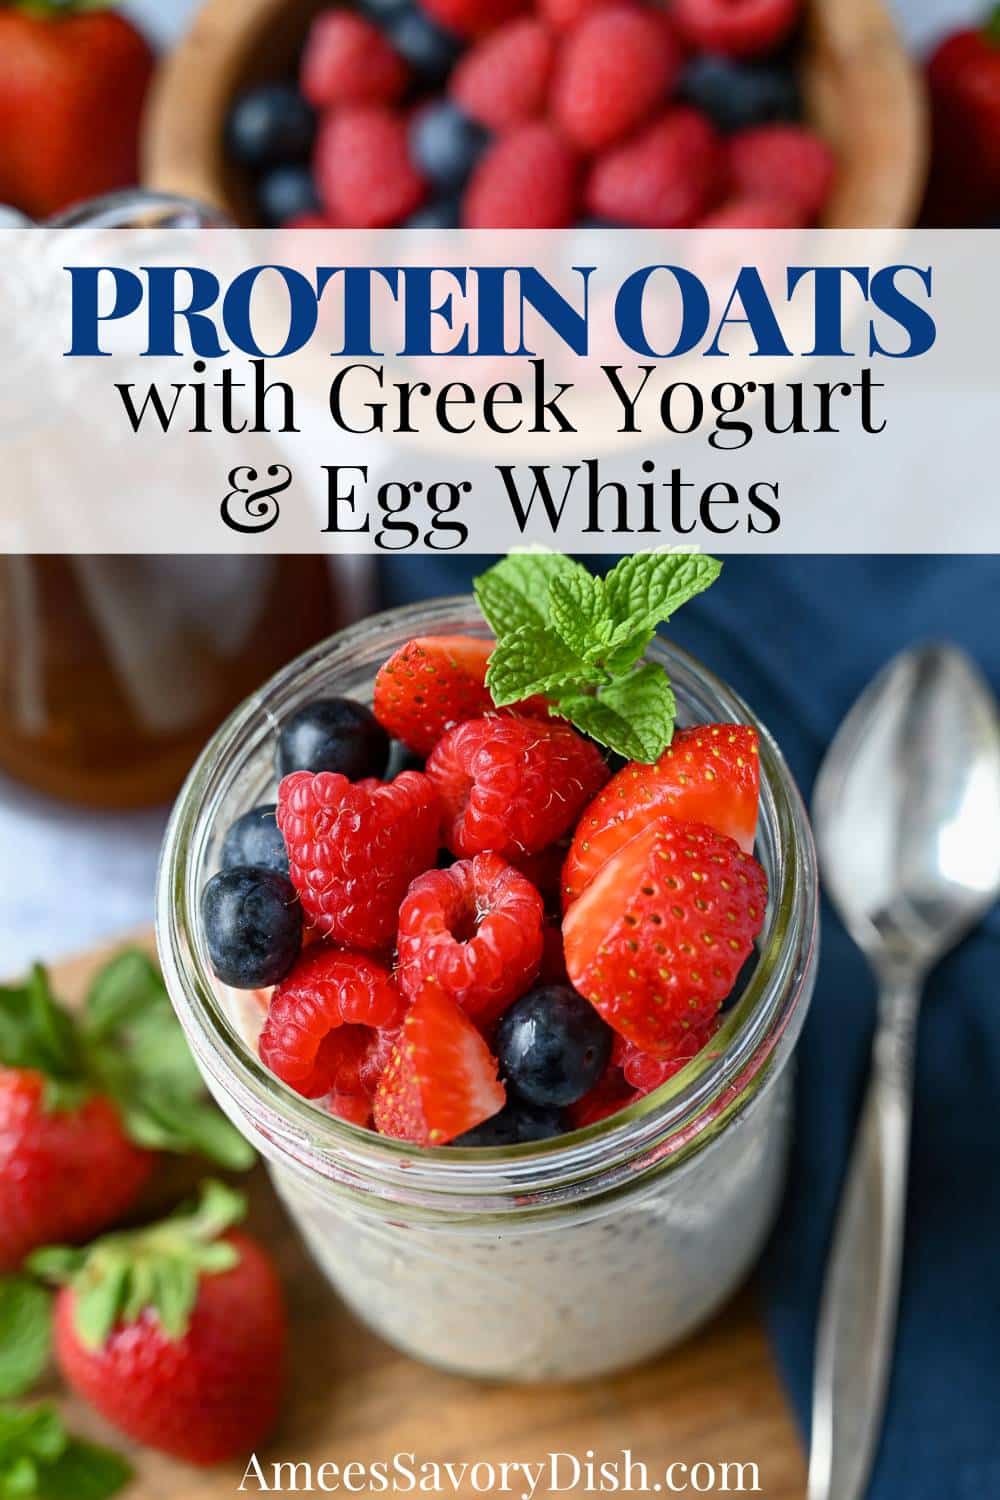 This Overnight Protein Oatmeal made with Greek yogurt is the perfect breakfast solution when there is no time for breakfast prep in the morning. This protein-packed power porridge recipe will keep you running until lunchtime! via @Ameessavorydish